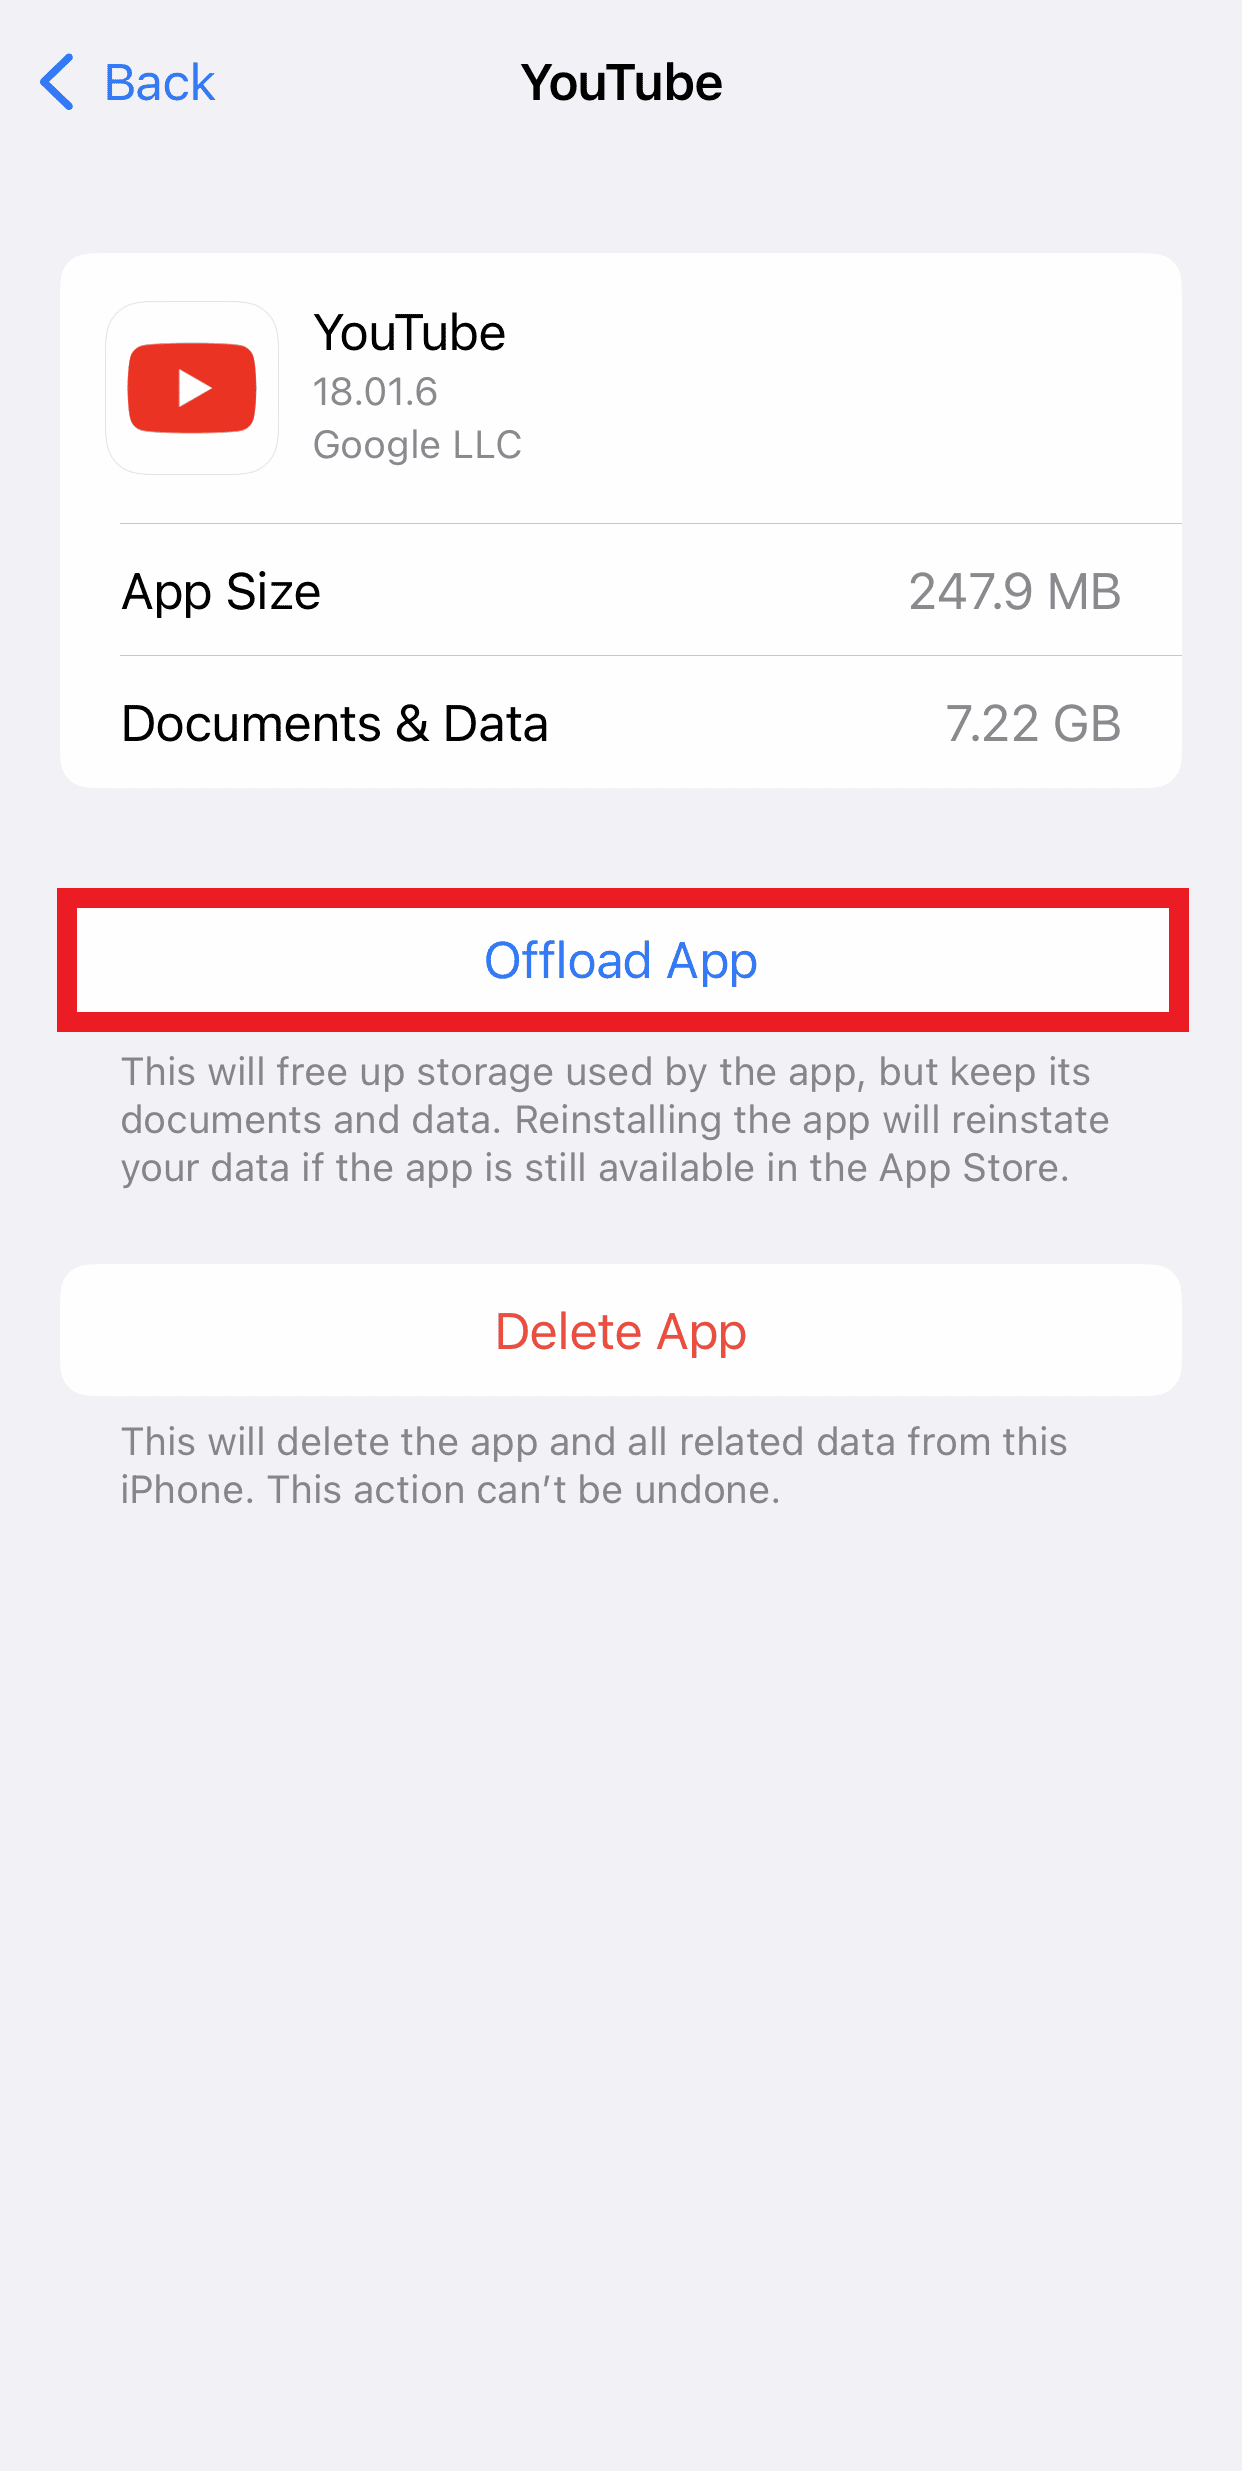 Tap on Offload App to free up storage on your iPhone